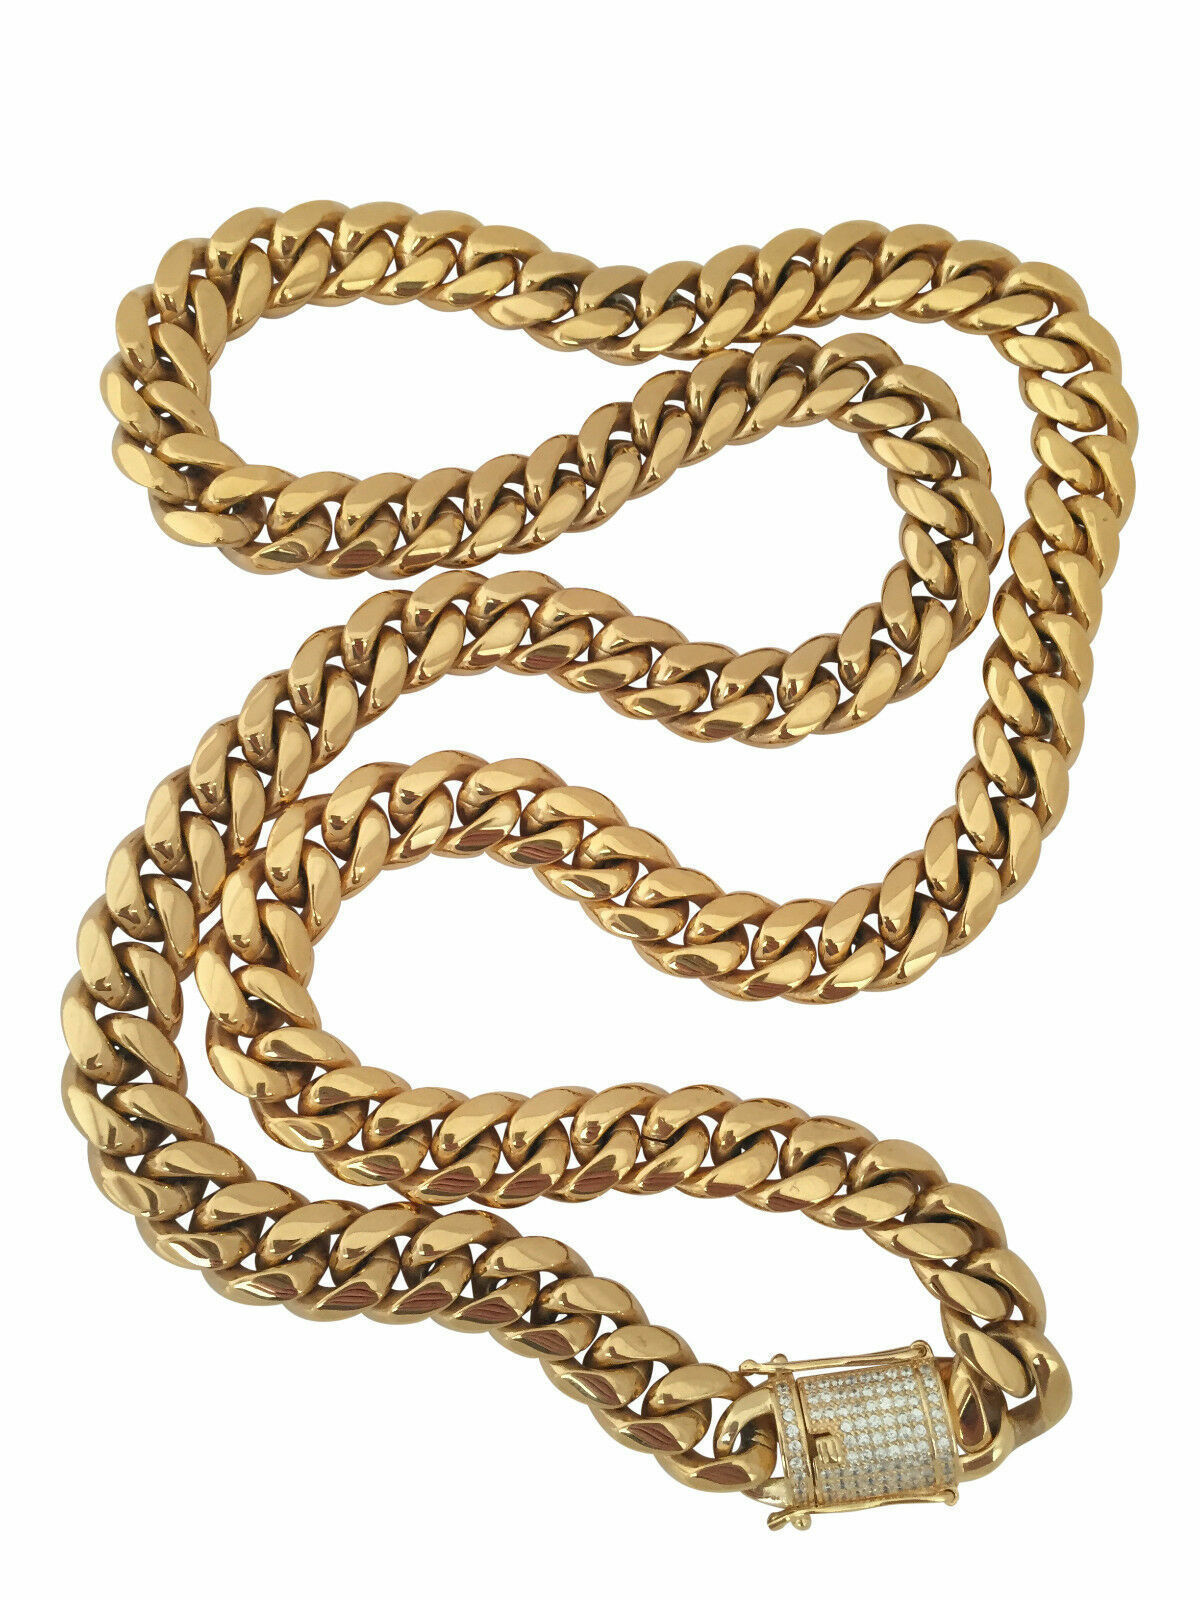 14K Gold GP Stainless Steel Cuban Link Chain CZ Iced Clasp Lock 12mm 22" 24" 26" - $19.79 - $23.75